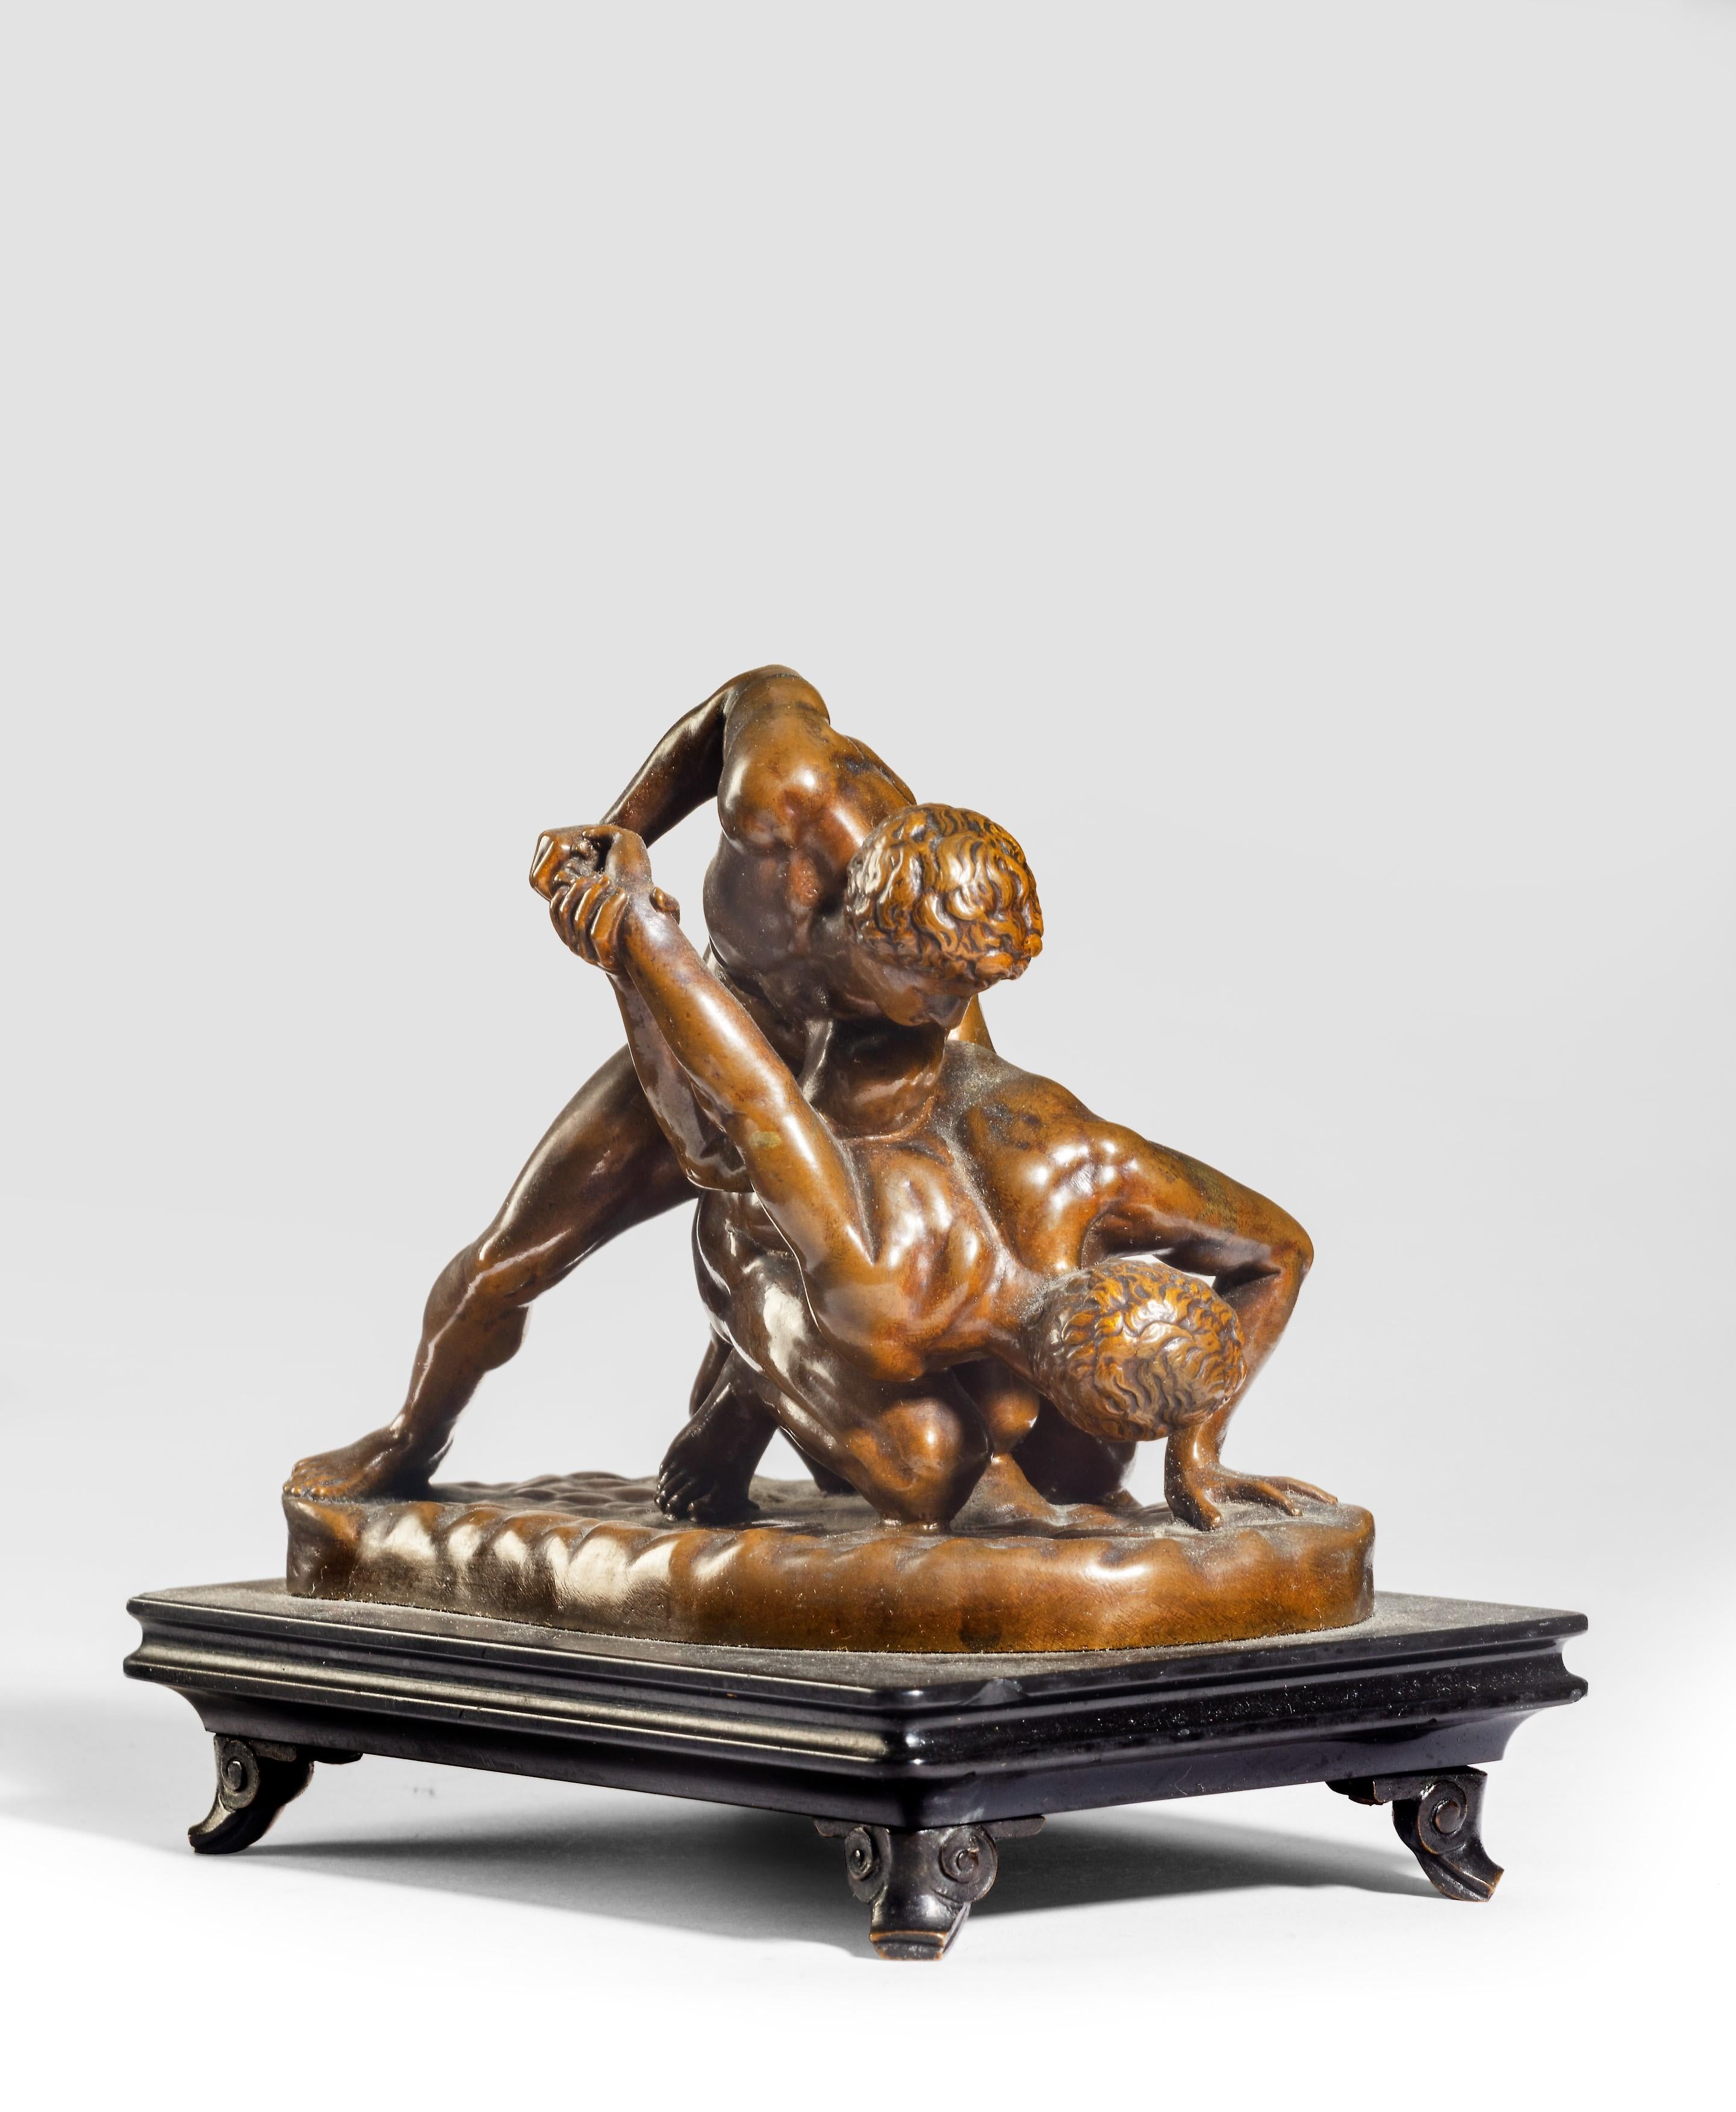 A Grand Tour bronze model of 'The Wrestlers', After the Antique - Sculpture by Unknown